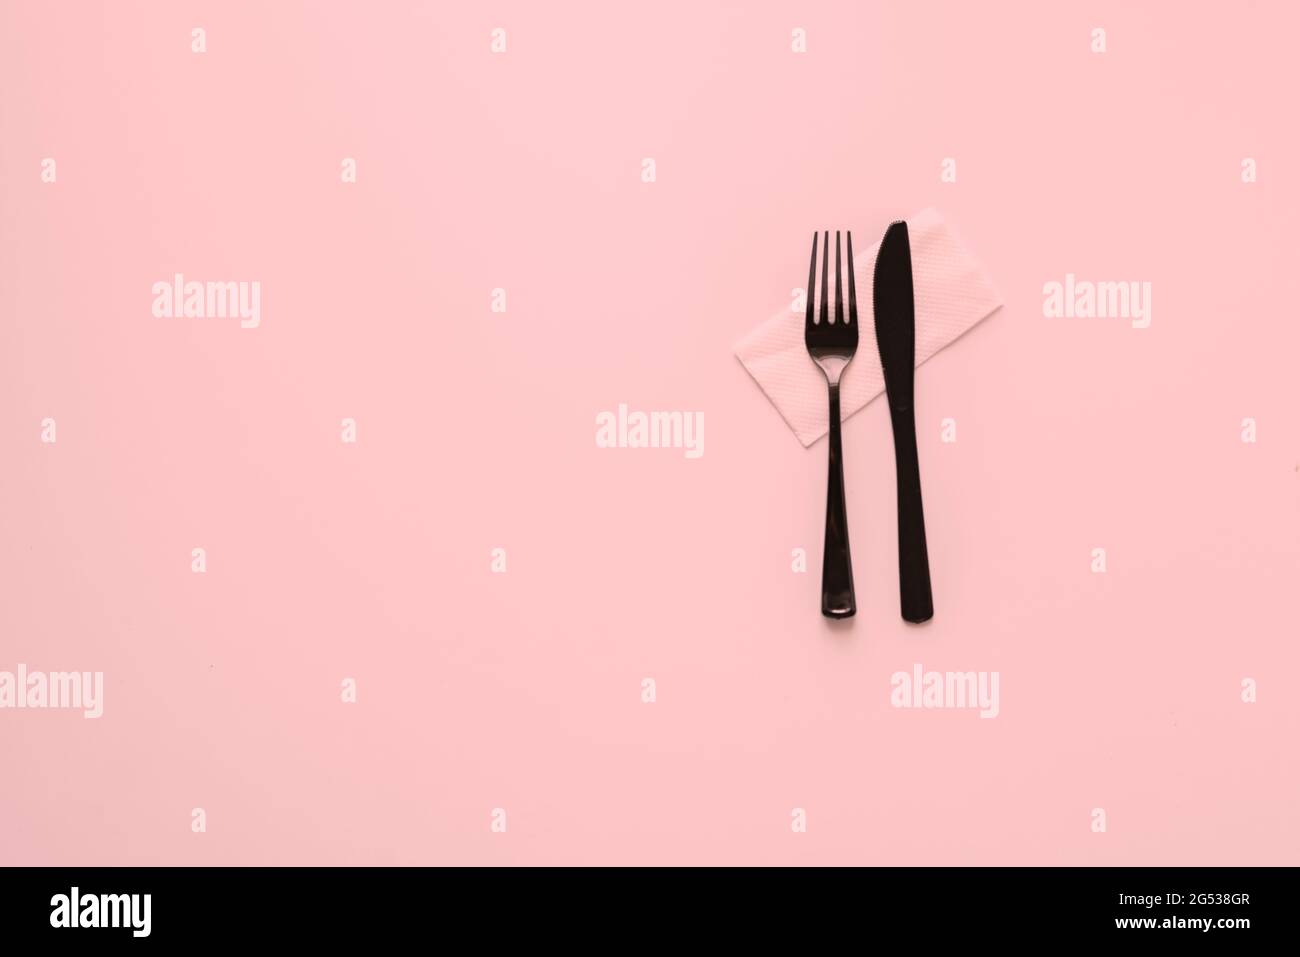 top view conceptual minimalism with plastic table utensil tablewear cultery Stock Photo